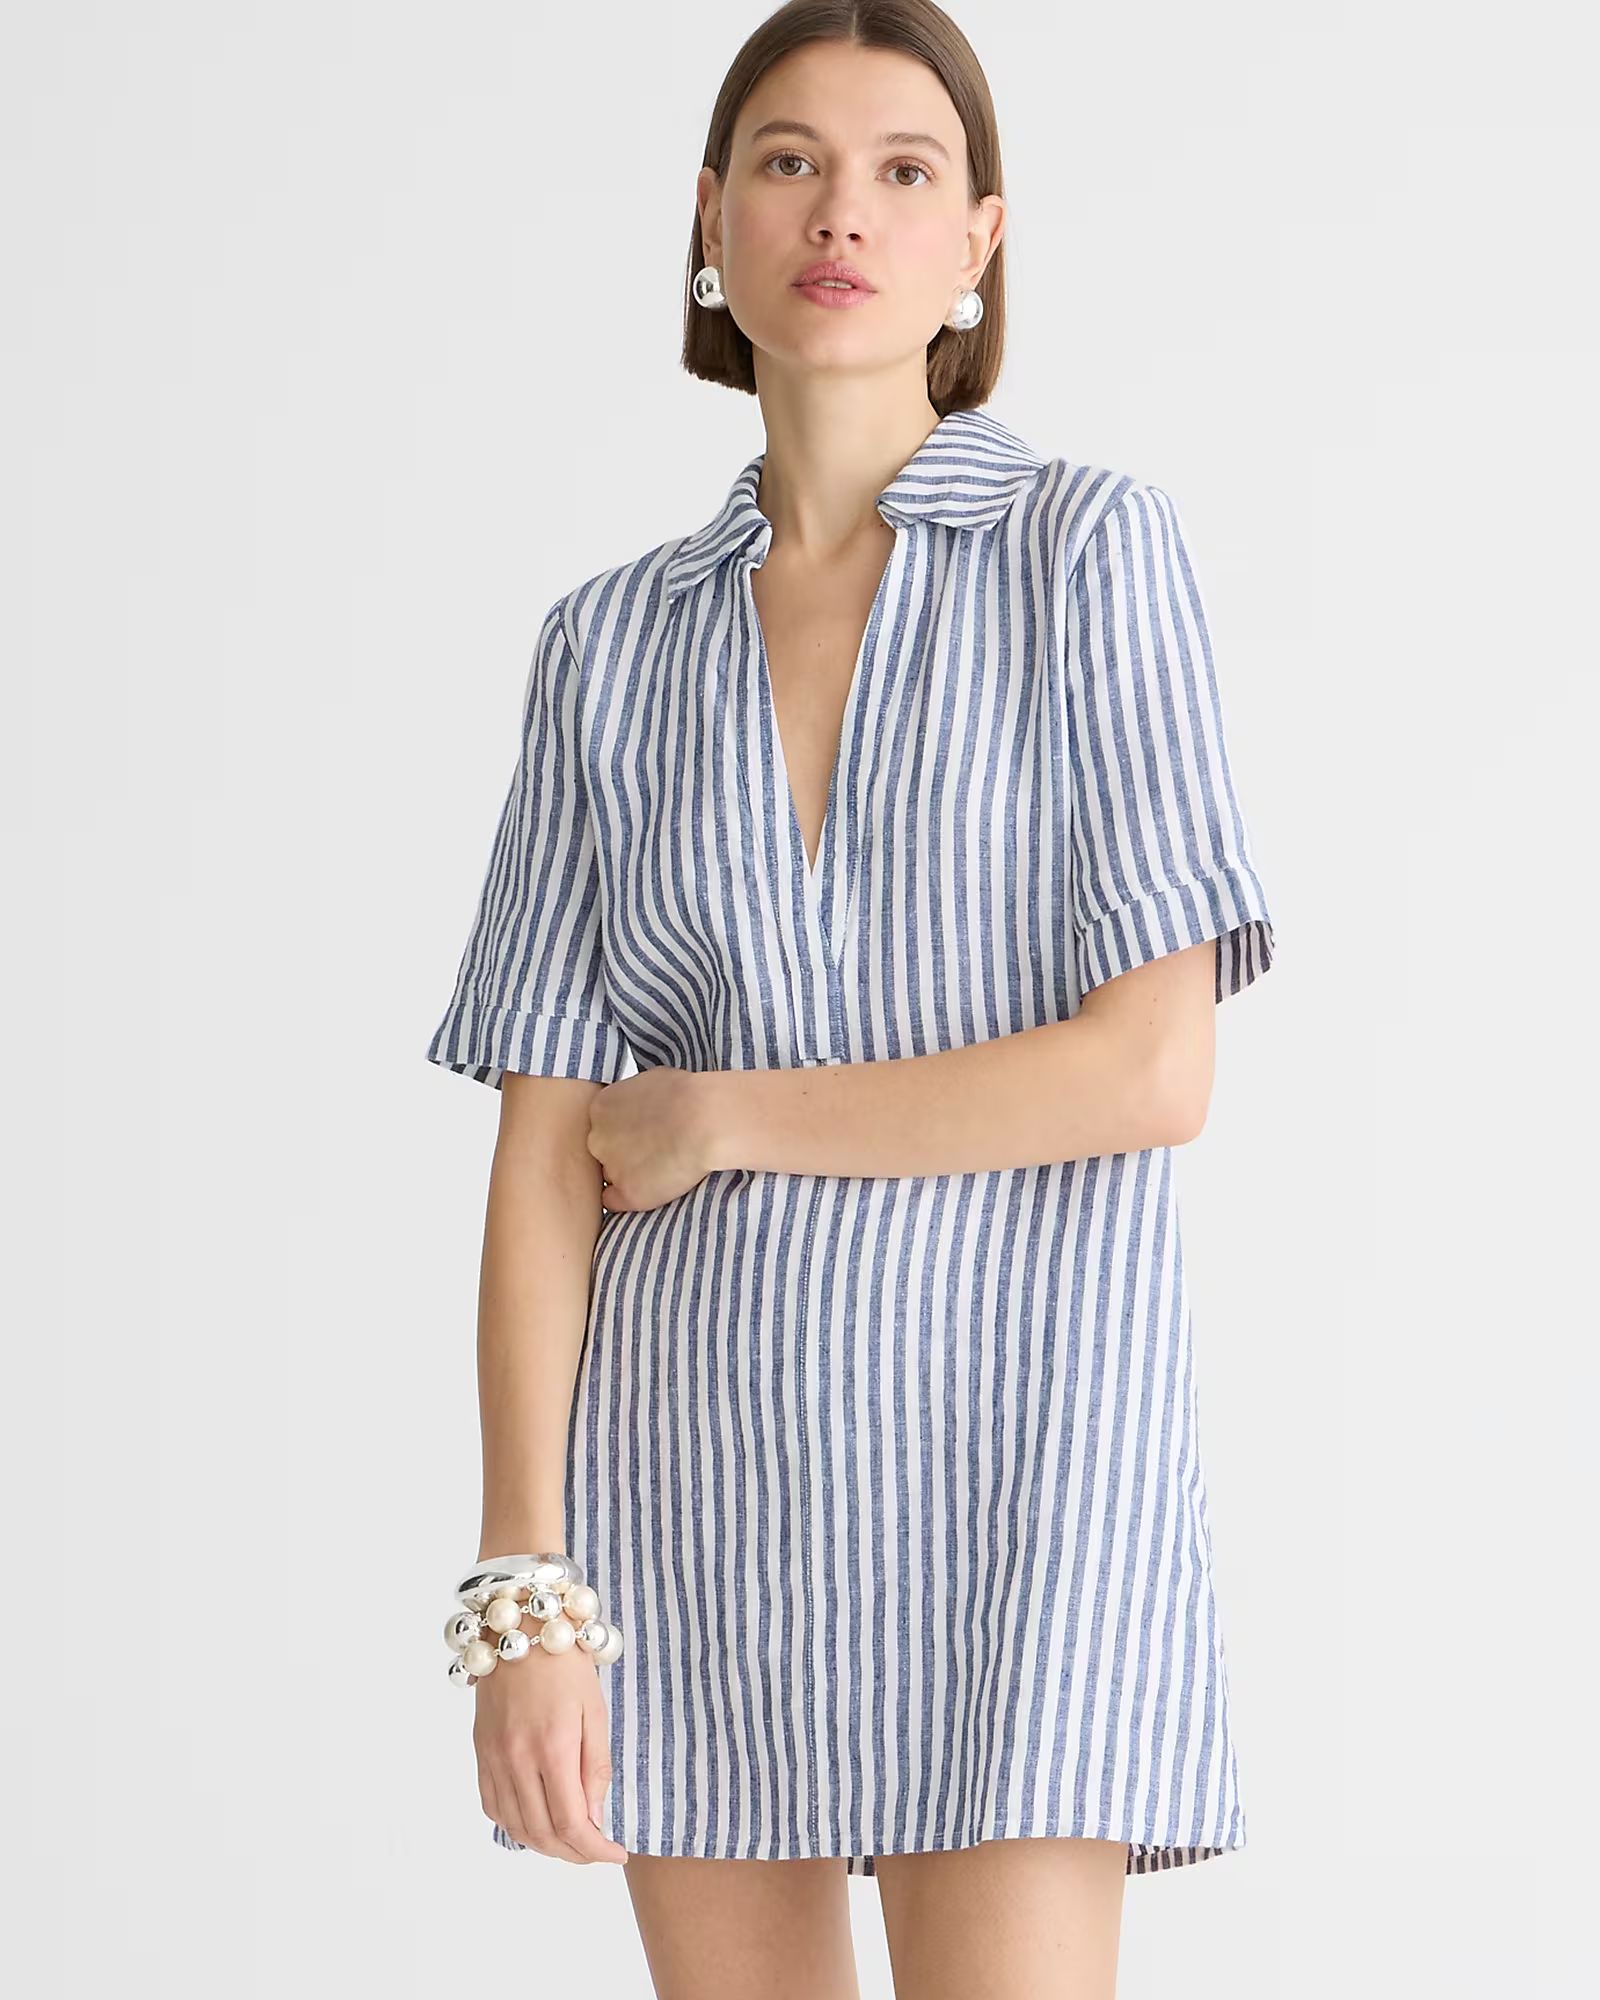 top rated4.6(95 REVIEWS)Bungalow popover dress in stripe linen$128.00-$118.00Select Colors$74.50D... | J.Crew US